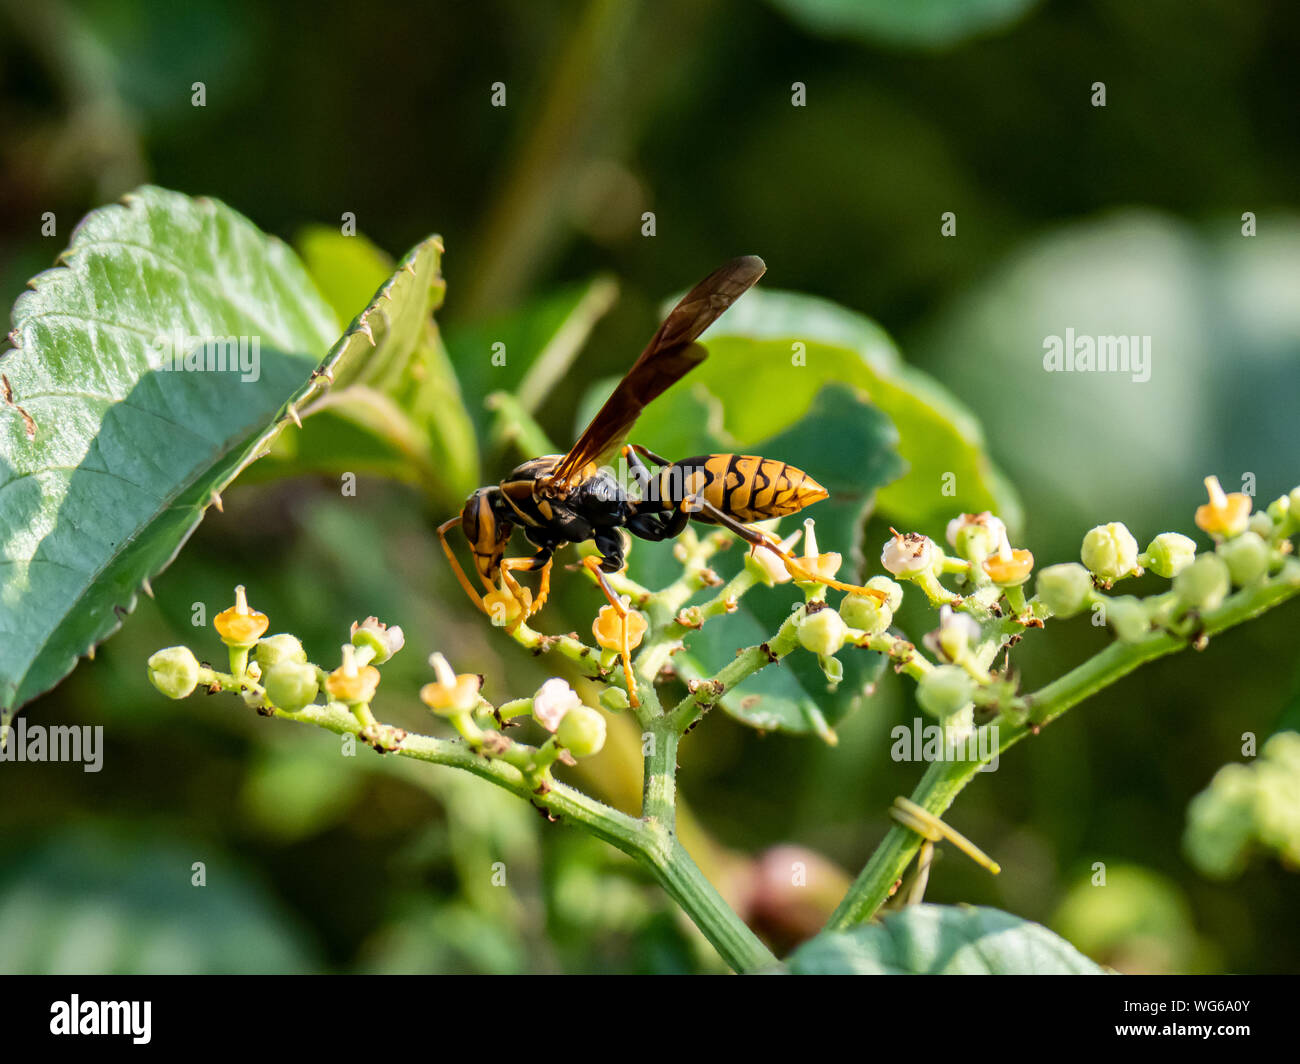 A Rothney's paper wasp, polistes rothneyi, on a cluster of small bushkiller flowers in a park in Yokohama, Japan Stock Photo